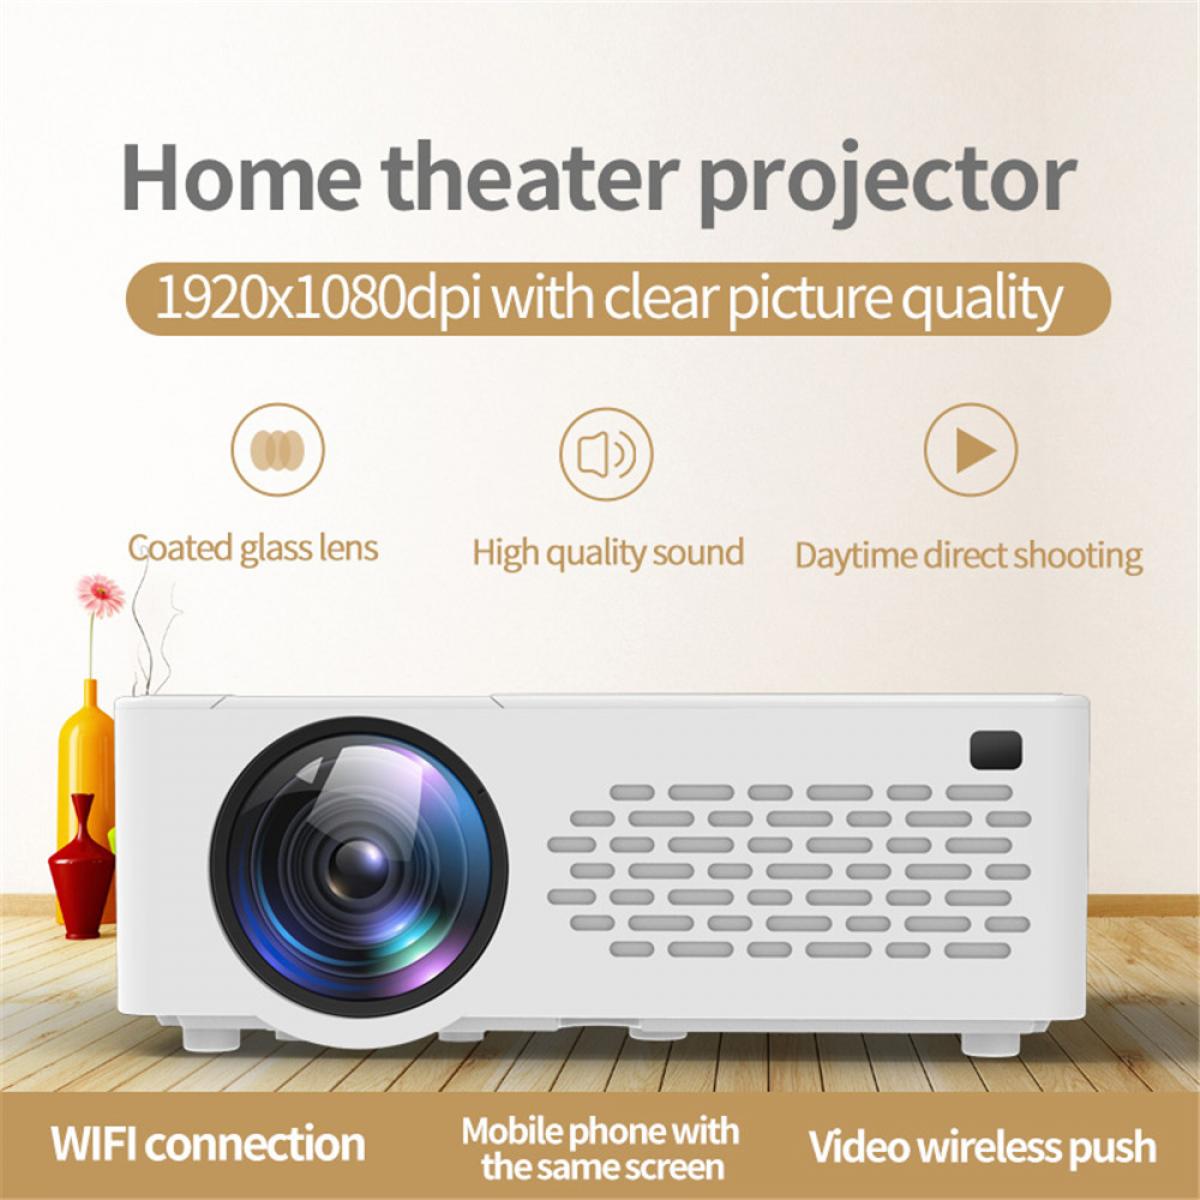 ACHICOO Mini Projector LCD LED Portable Projector Home Theatre Cinema Video Media Player Black UK Plug Electronic Phone Computer Products for Travel//Work